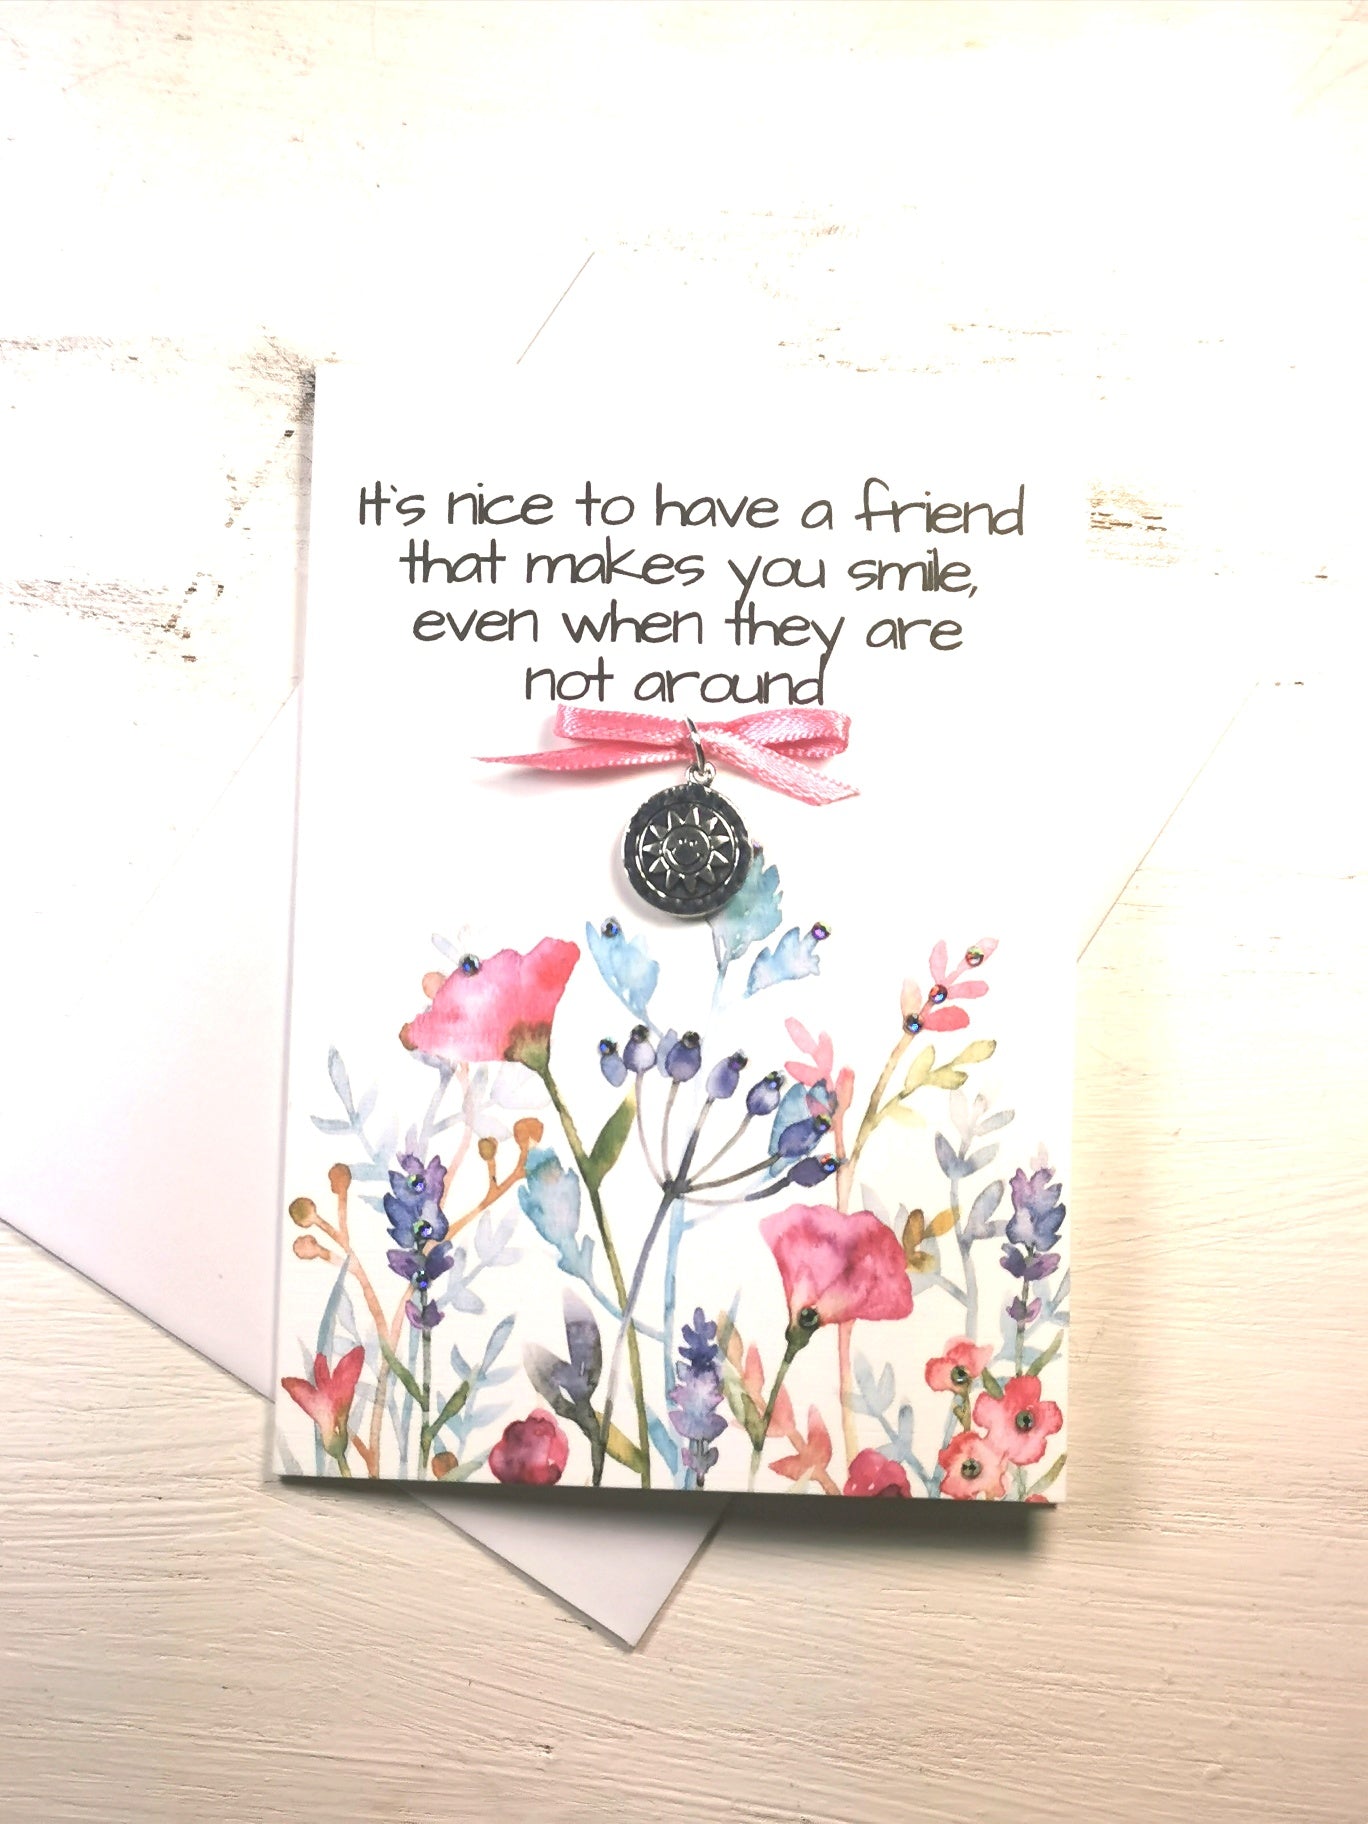 Girlfriends that make you Smile charm | Card Friendship Charm gift Card | Girlfriends Birthday card | Friendship Smile charm | Friendship flower